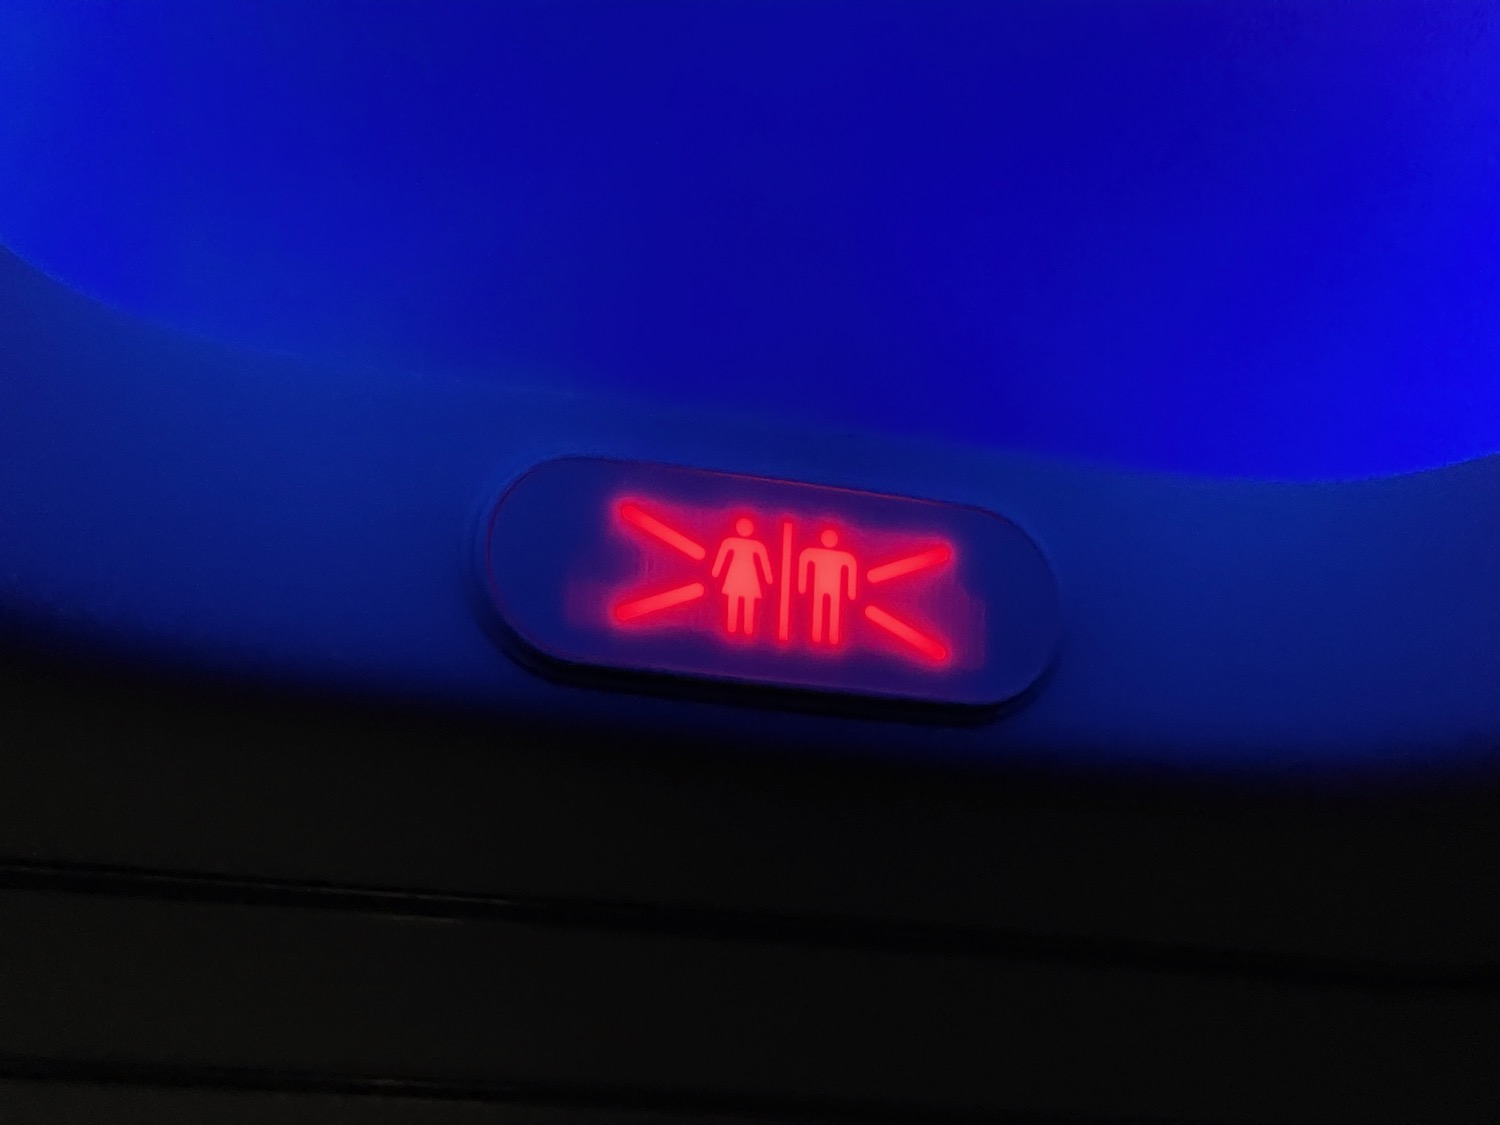 a red light on a blue surface